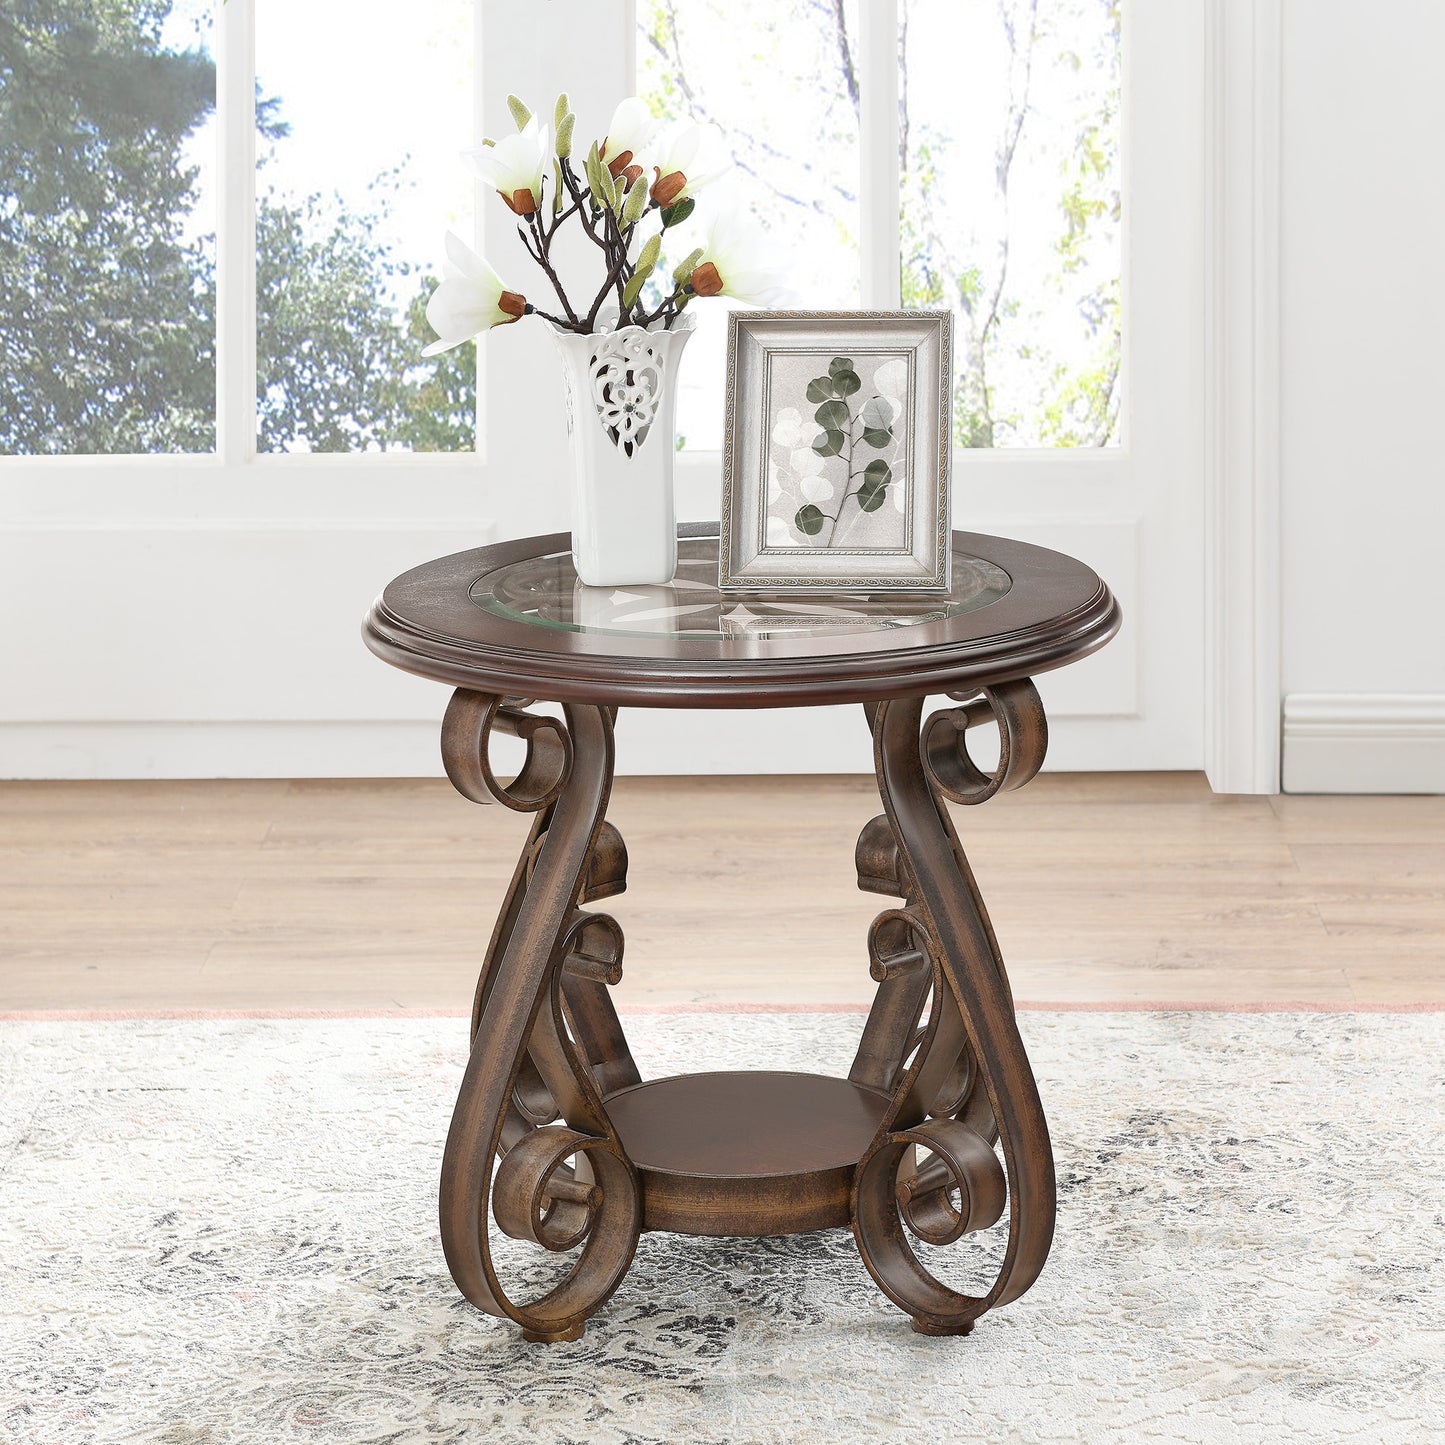 Luxury End Table with Glass Table Top and Powder Coat Finish Metal Legs, Dark Brown